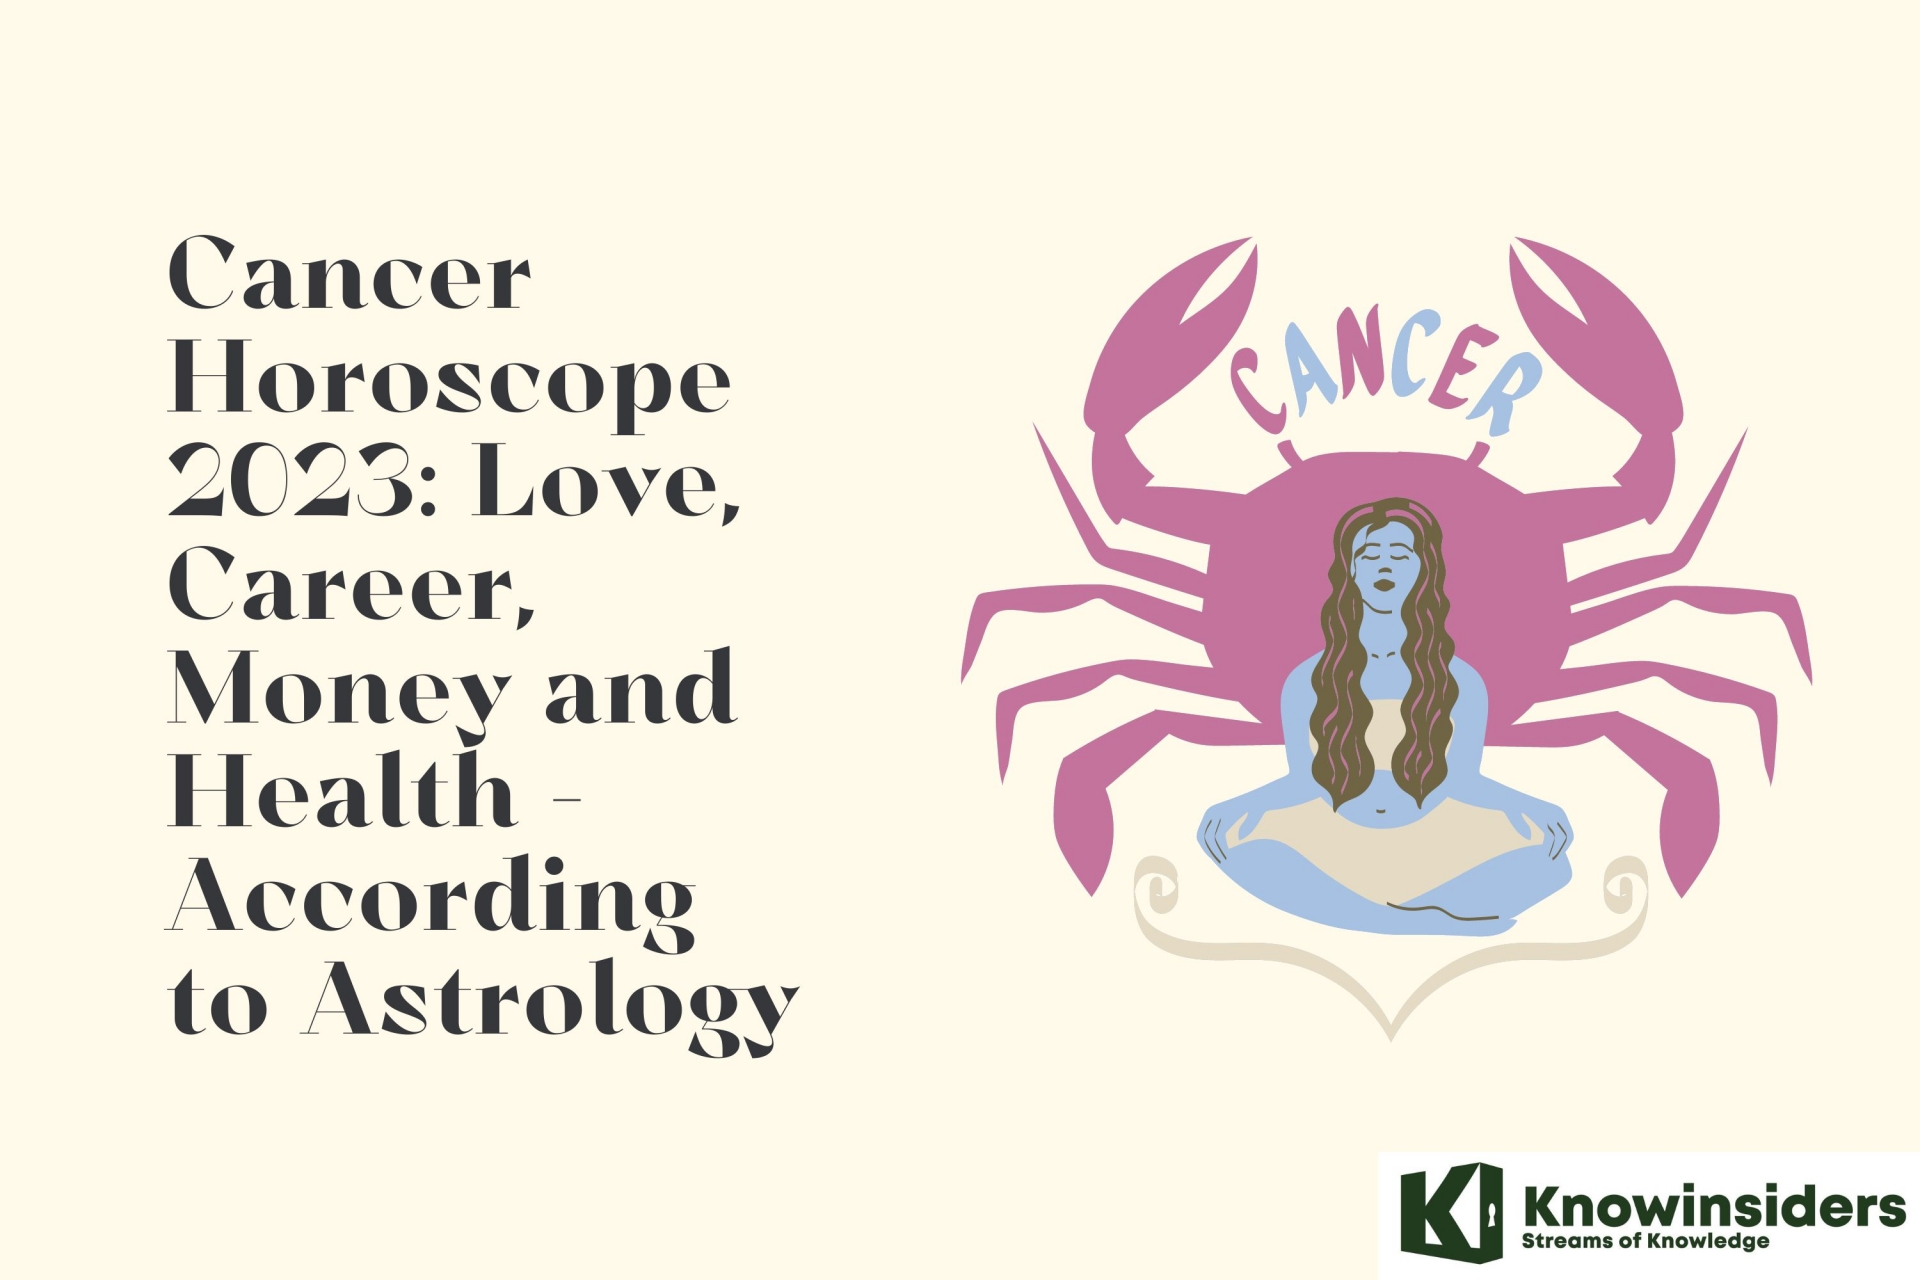 Cancer Horoscope 2023: Love, Career, Money and Health - According to Astrology